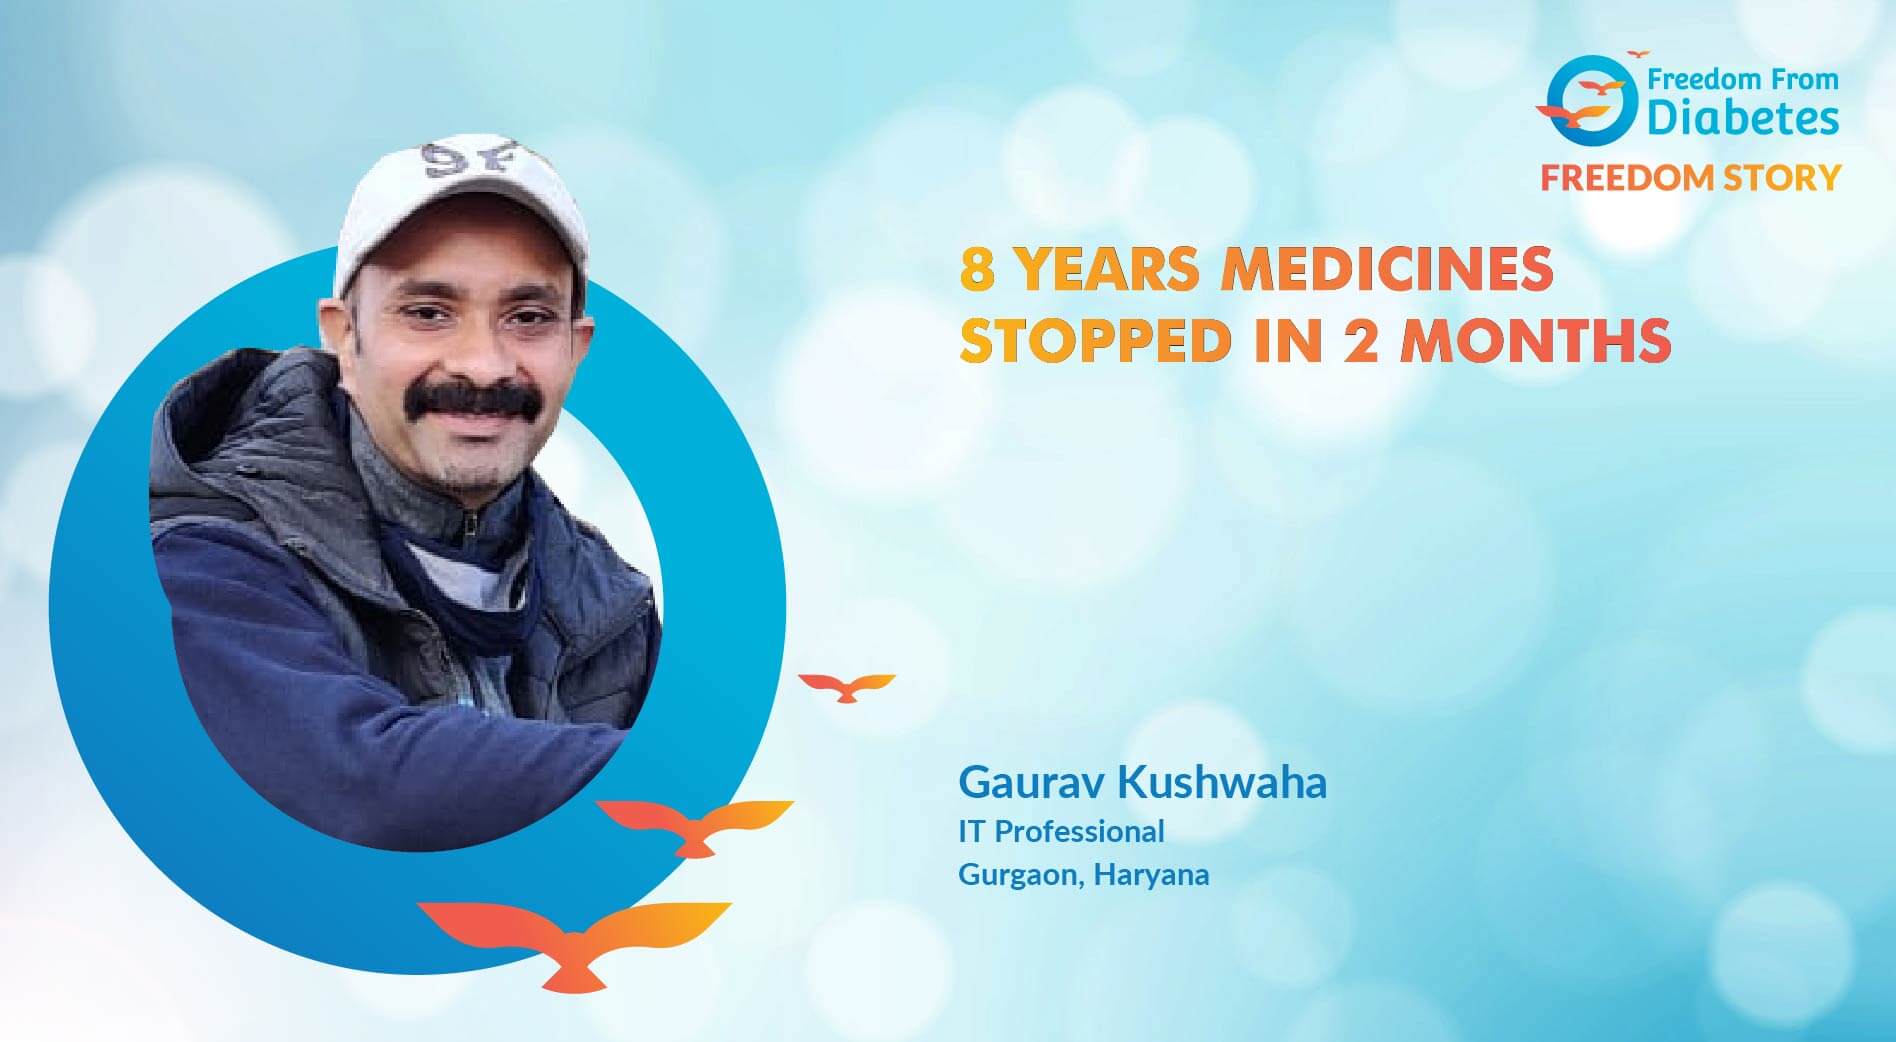 8 years medicines stopped in 2 months